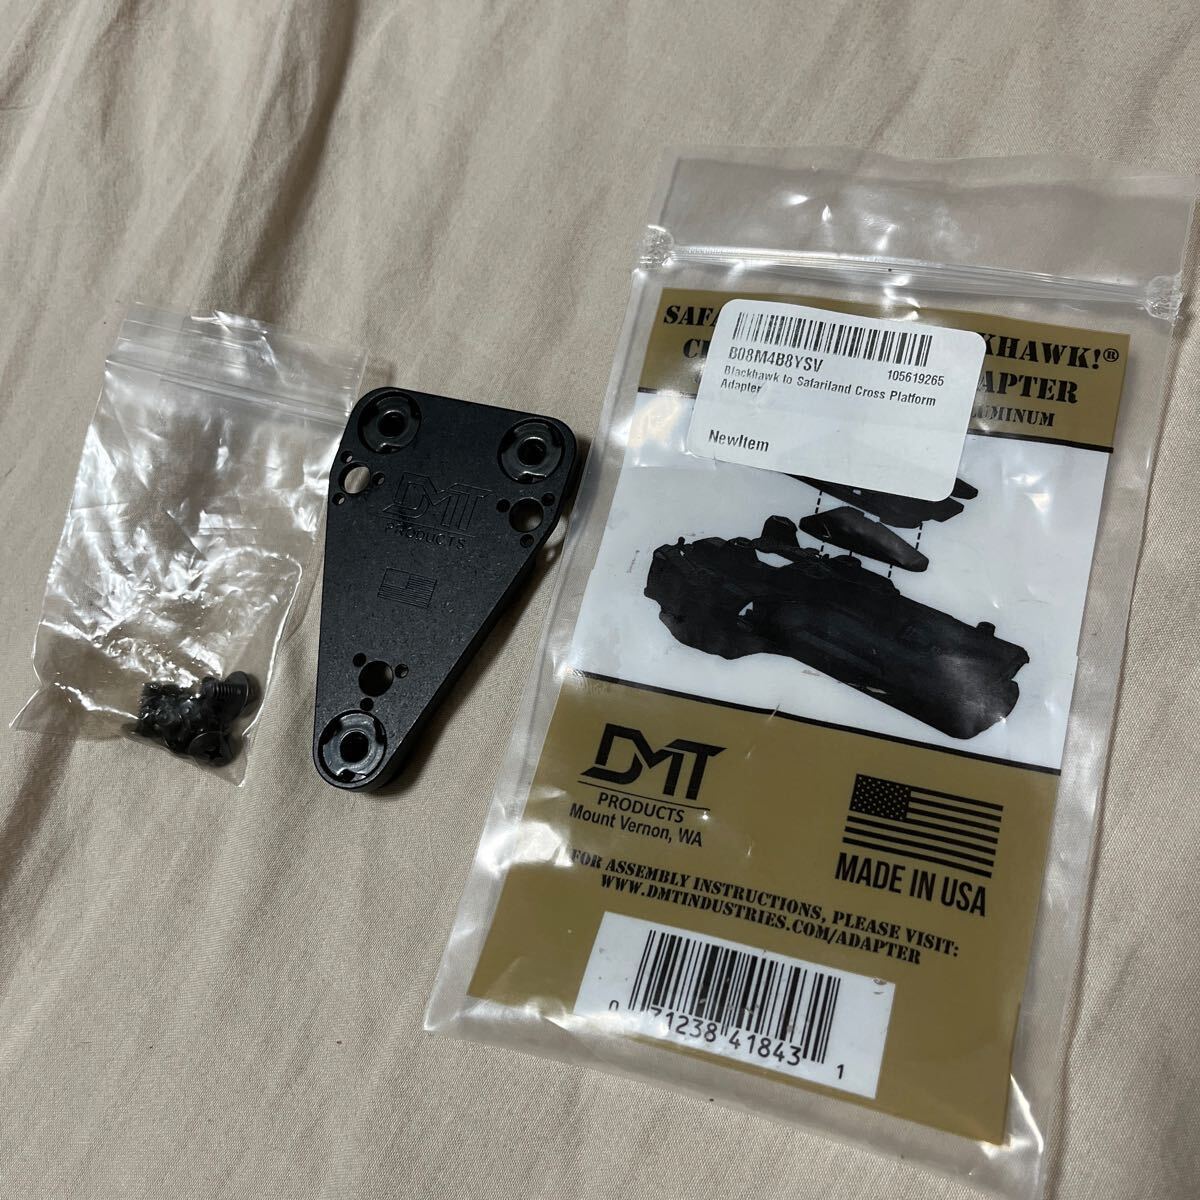  the truth thing Blackhawk Omnivore T-Series Serpa holster to Safariland QLS conversion adaptor 